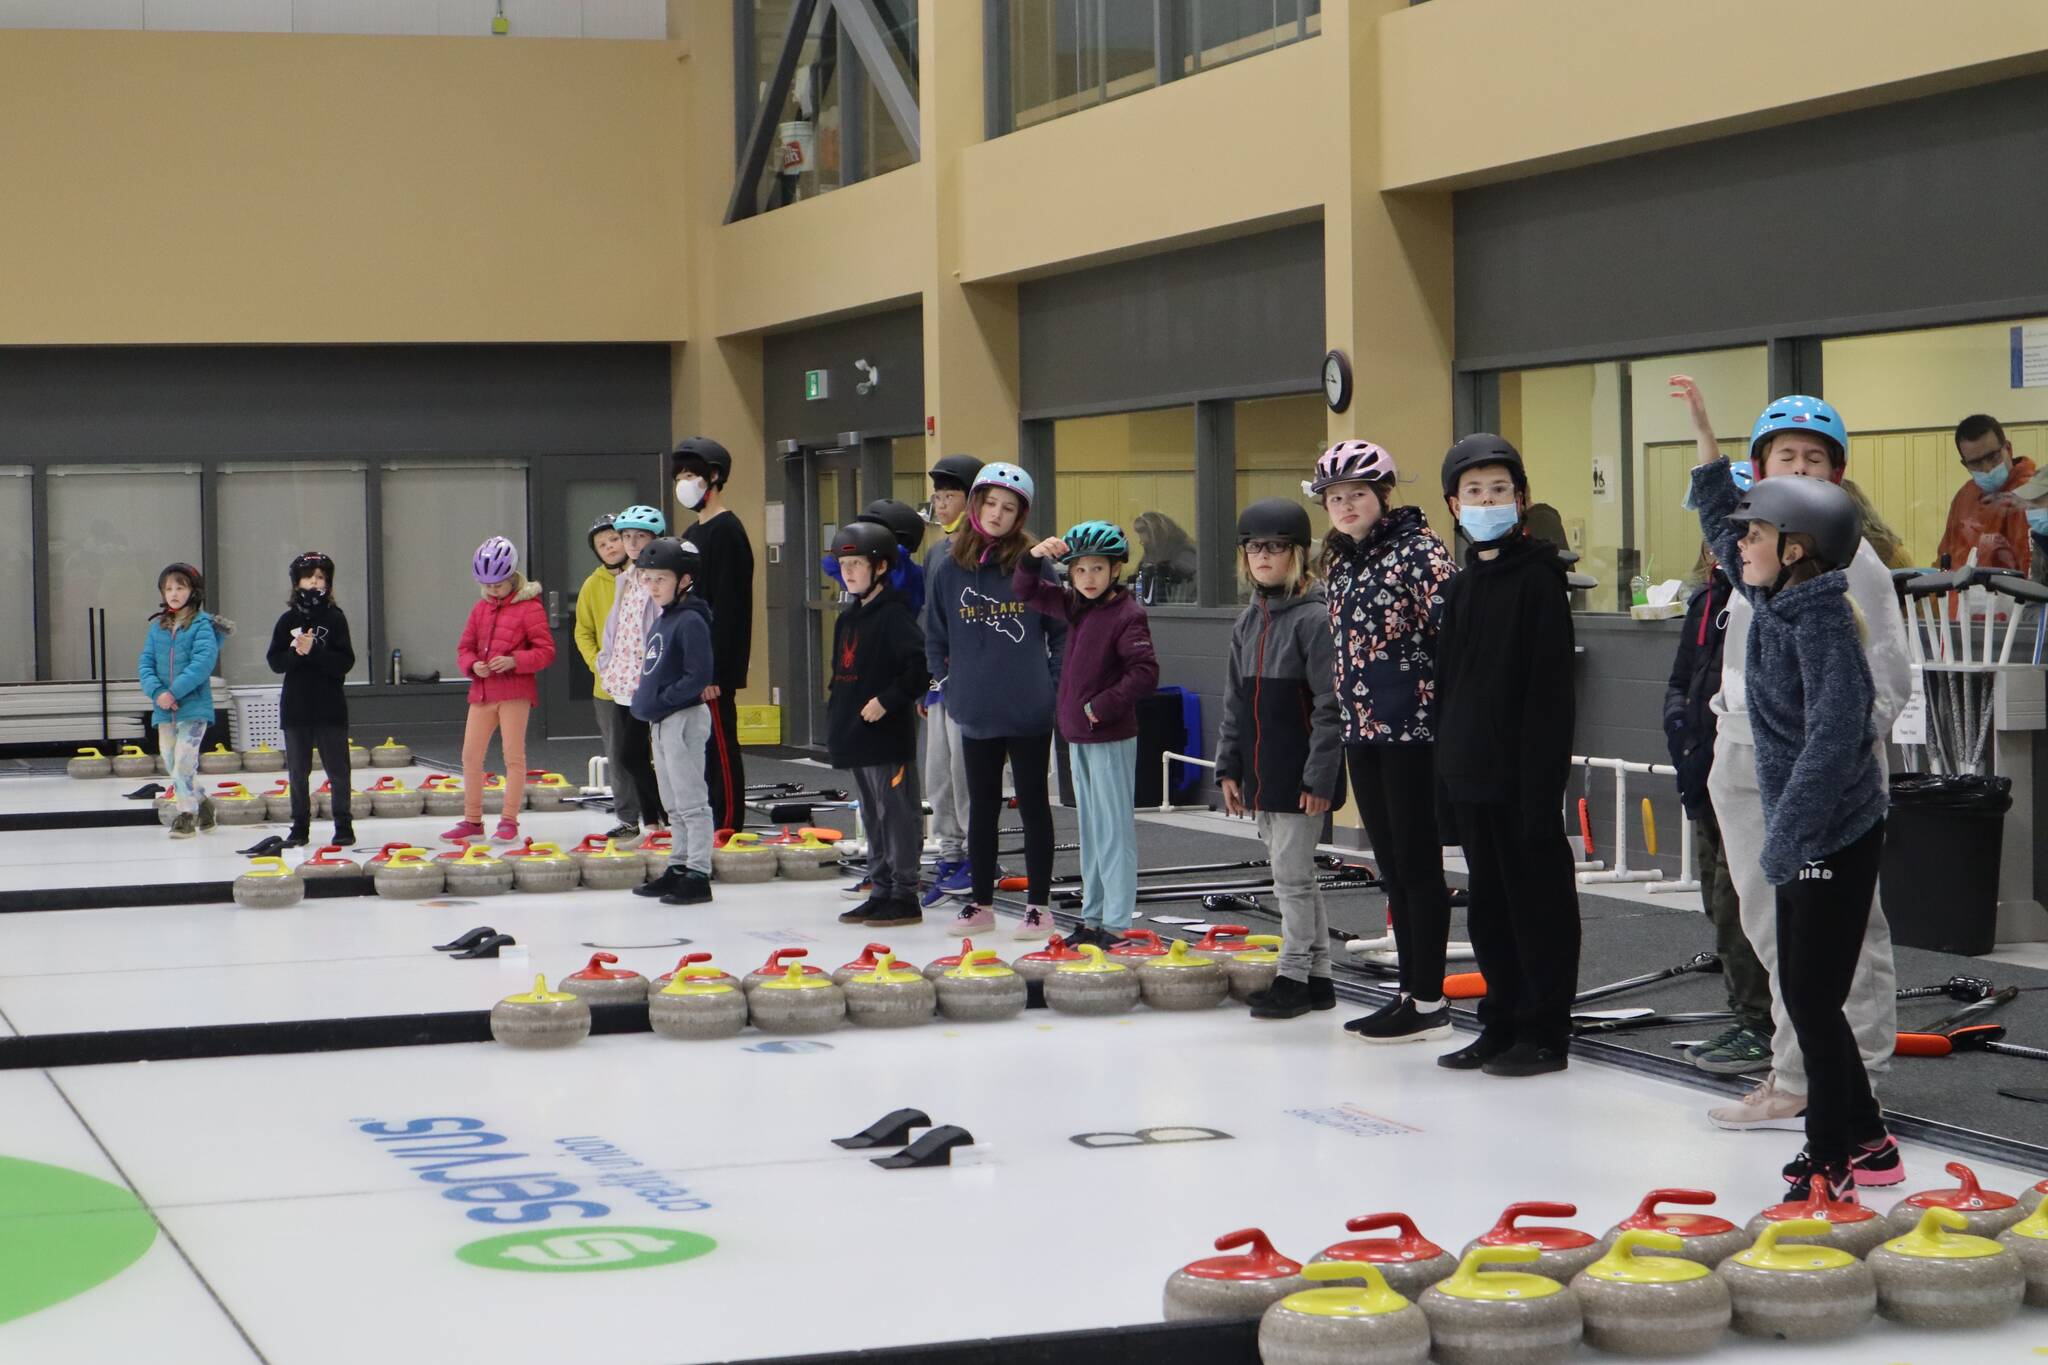 27177529_web1_211118-SLN-Youth-Curling-free-event_3